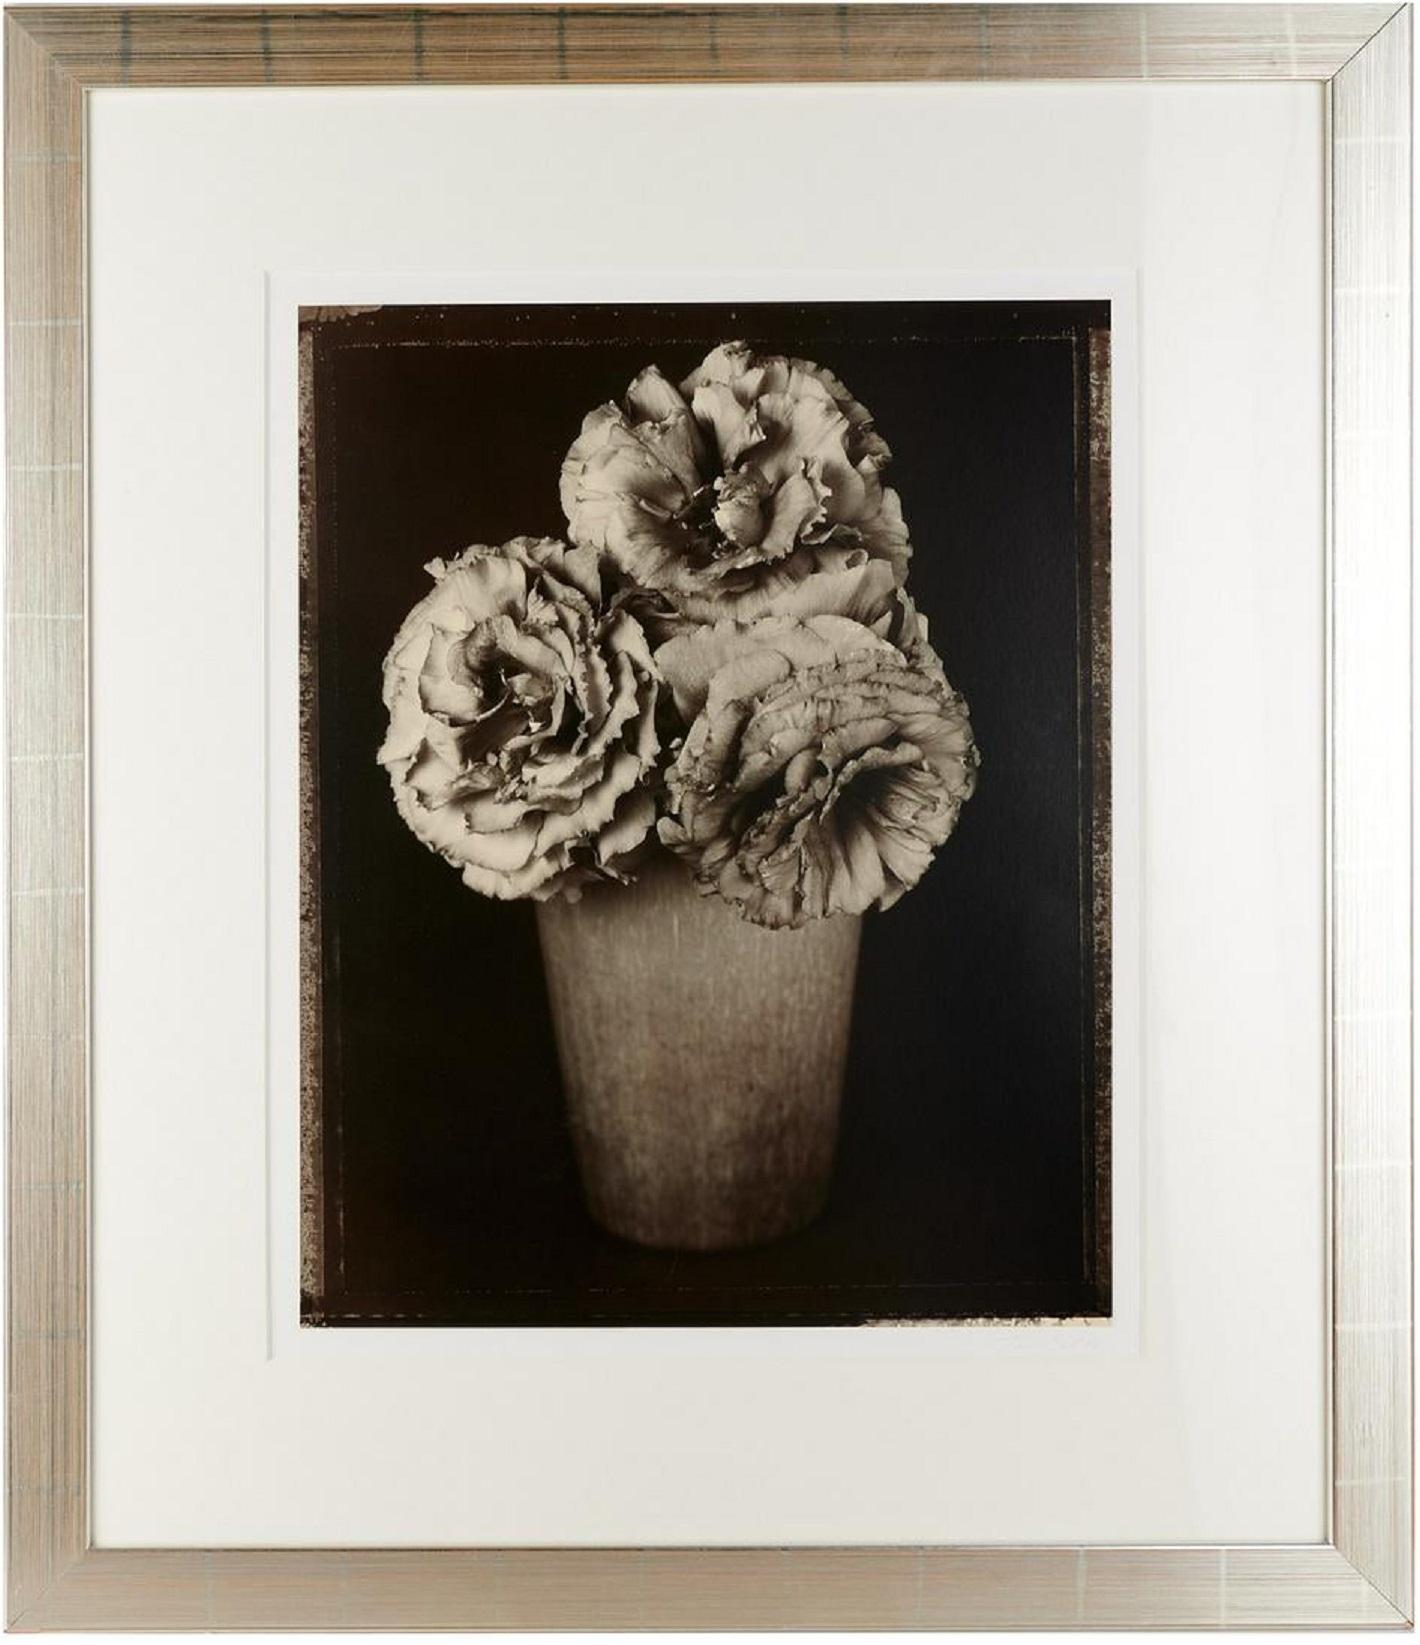 Baril, Tom (American, b. 1952)
Large format silver gelatin print still life of flowers photo. hand signed and dated 1997 by Baril in pencil below image. black and white photograph. image measures 24.5